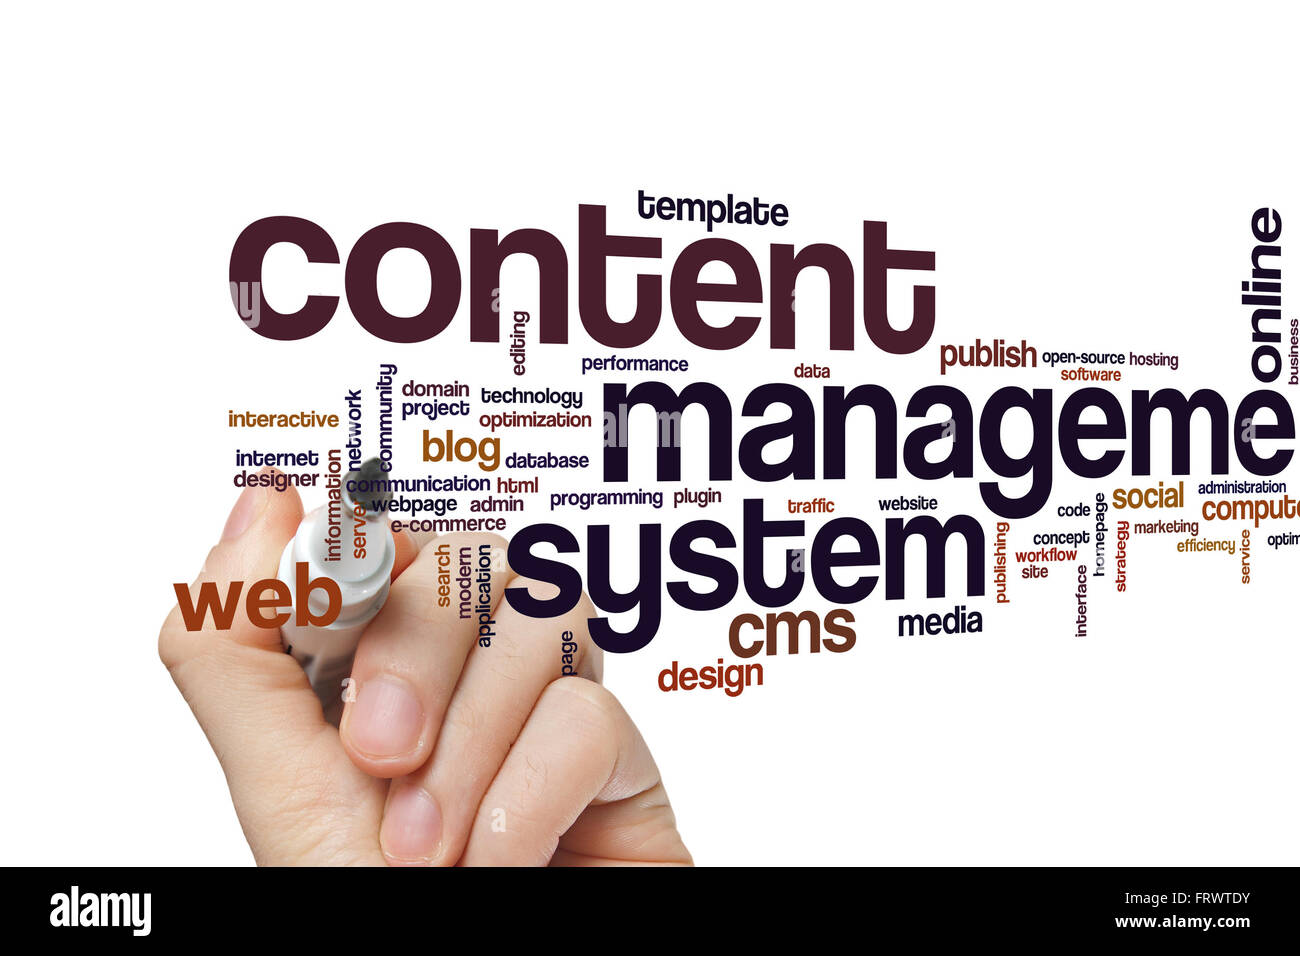 Content management system concept word cloud background Stock Photo